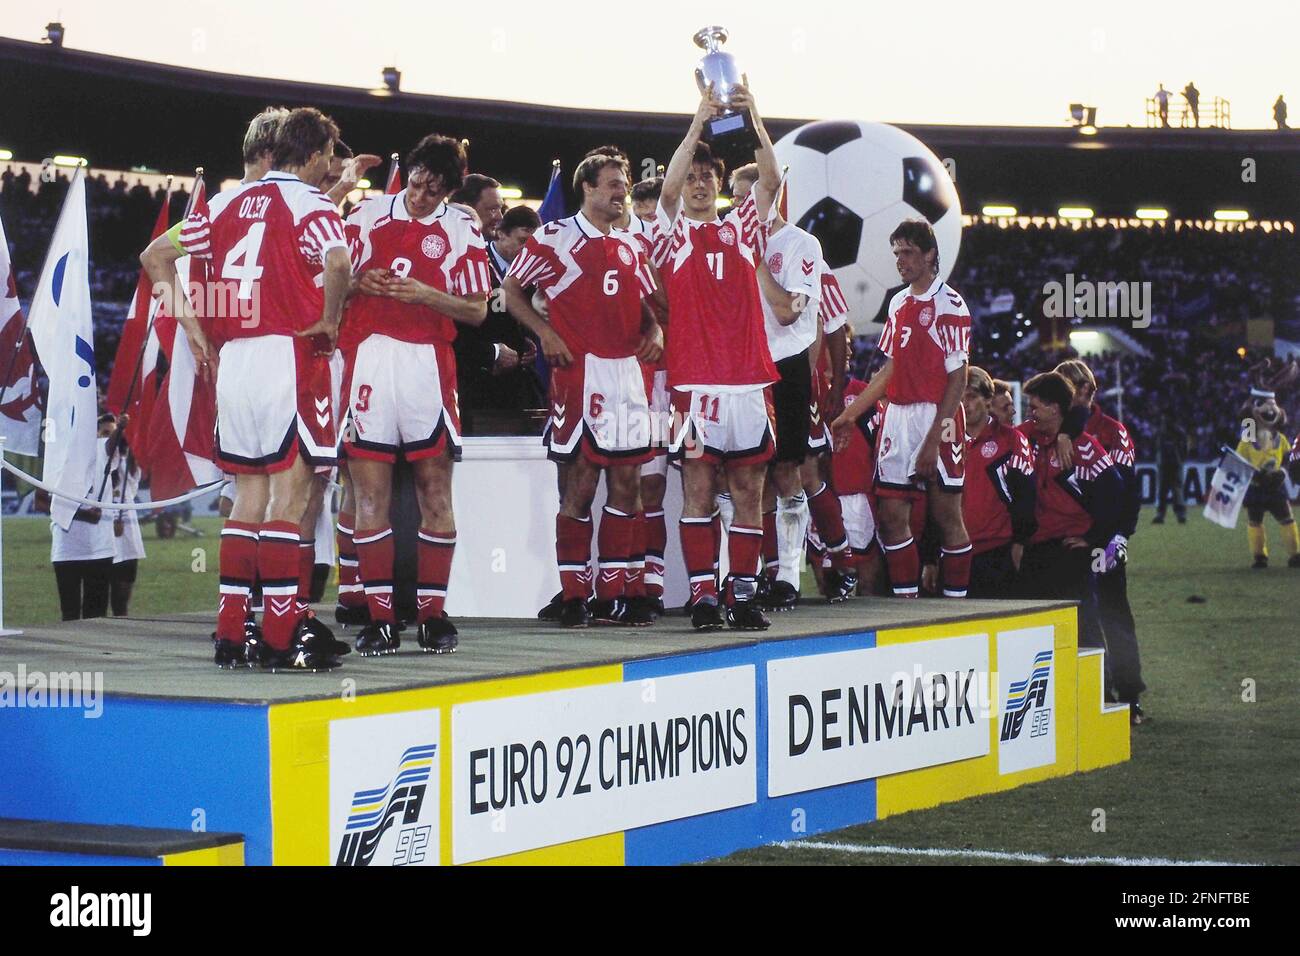 FOOTBALL European Championship 1992 Denmark - Germany Final 26.06.1992 The team of Denmark cheers with the European Cup: Lars OLSEN, Flemming POVLSEN, Kim CHRISTOFTE, Brian LAUDRUP, Kent NIELSEN (vlnr all Denmark) PHOTO: WEREK Press Picture Agency xxNOxMODELxRELEASExx [automated translation] Stock Photo